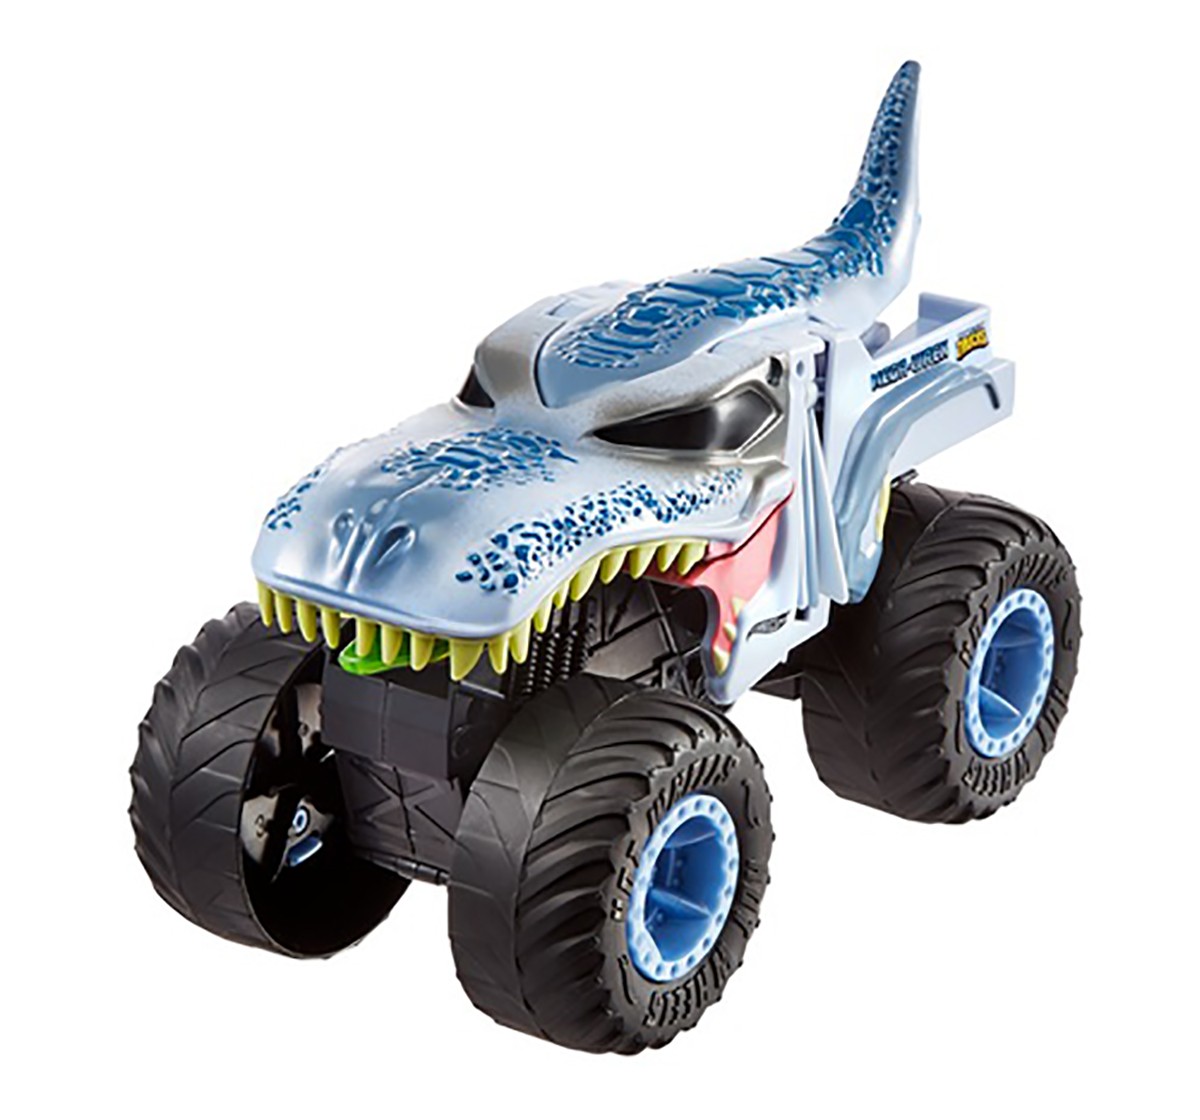 Hotwheels Monster Truck Wrecking Wheels Vehicles for Kids age 3Y+ 